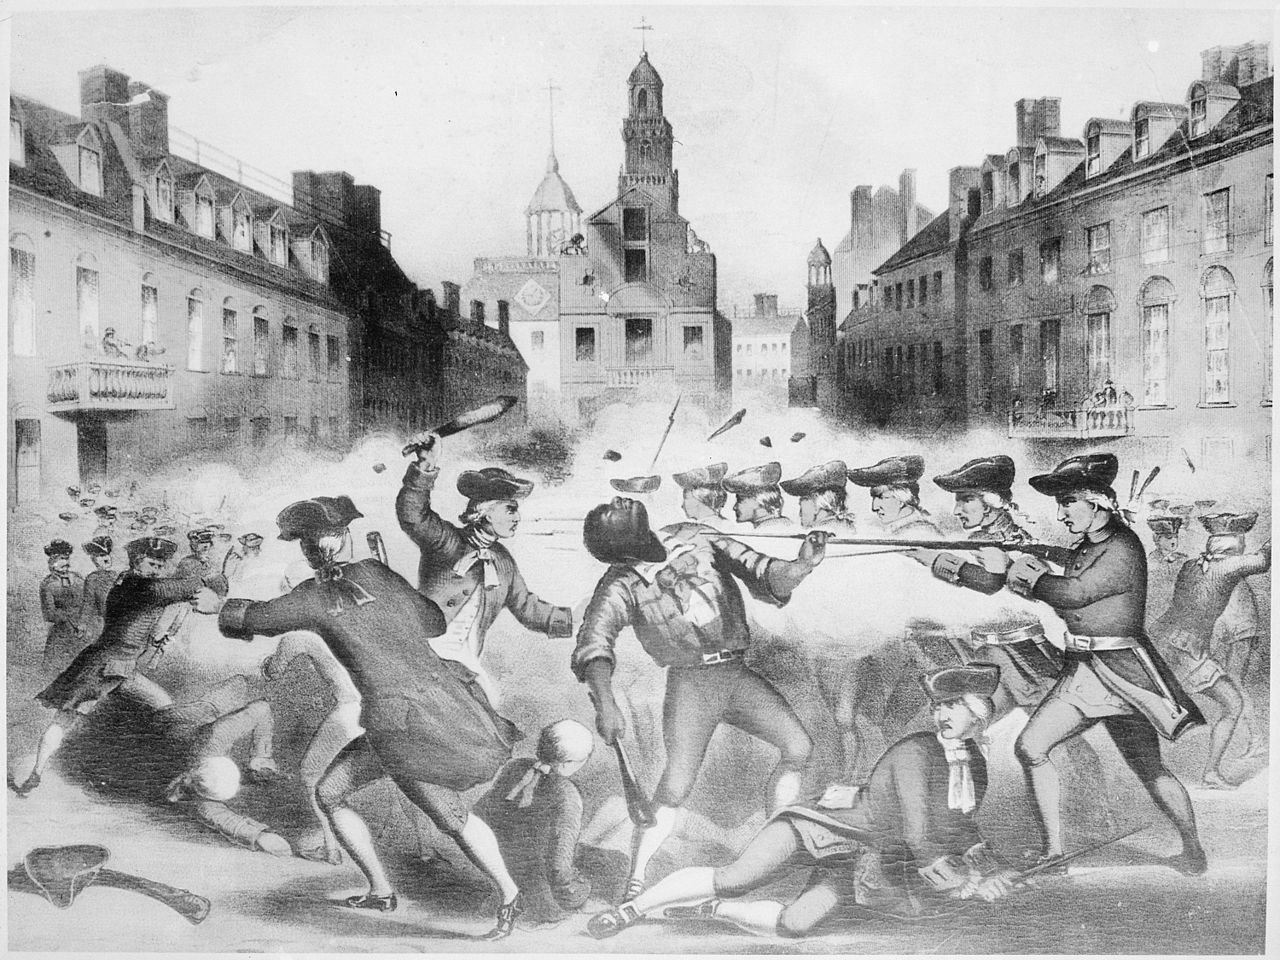 Scene of a fight between colonists with clubs on the left and British soldiers with long guns and bayonets on the right. A black man (Attucks) falls backward while griping a British soldier's long gun at the center of the image.